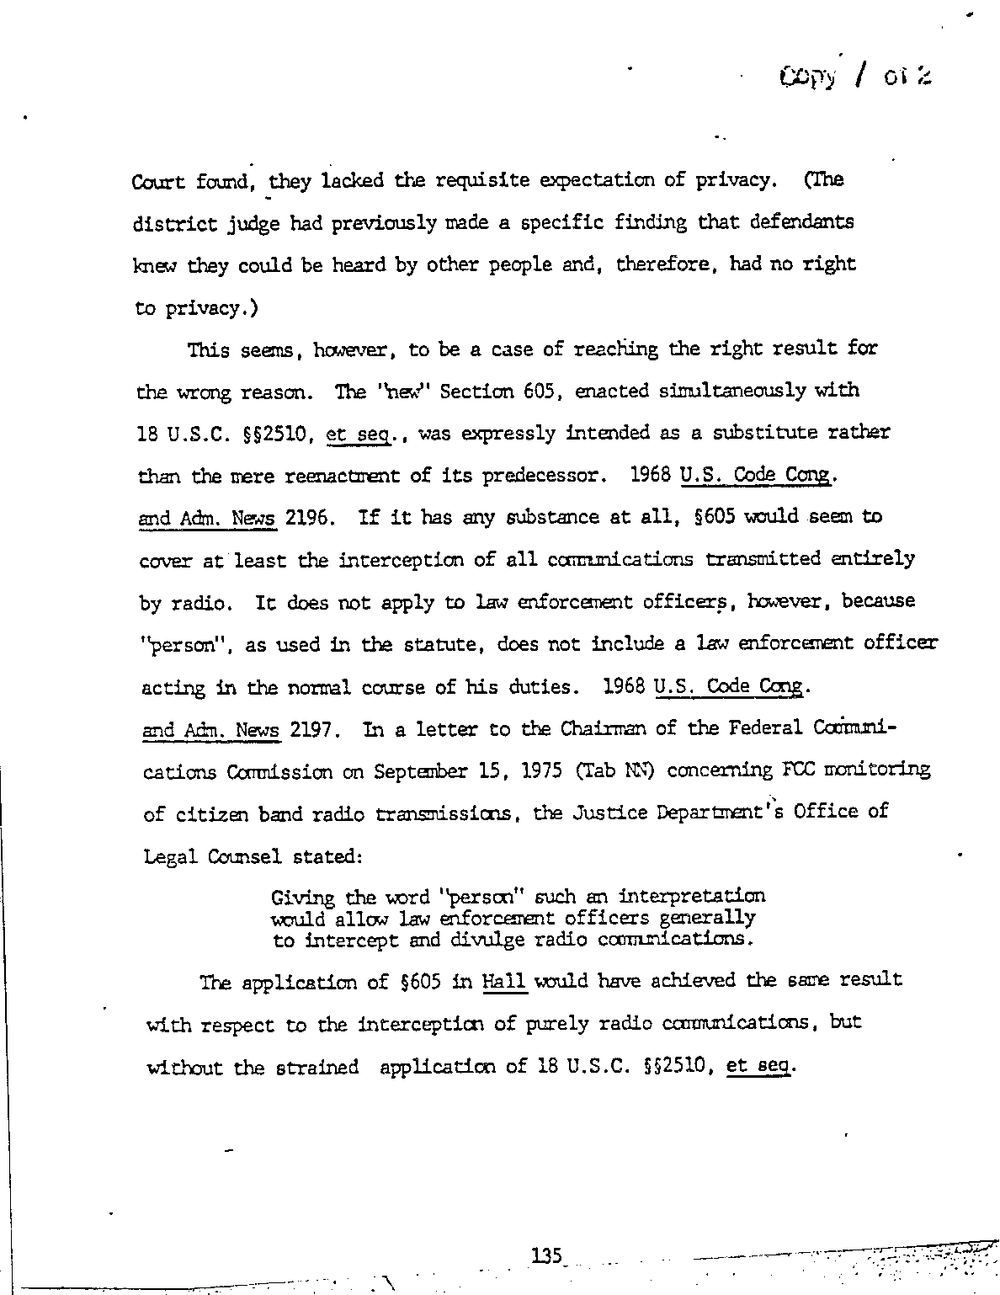 Page 143 from Report on Inquiry Into CIA Related Electronic Surveillance Activities